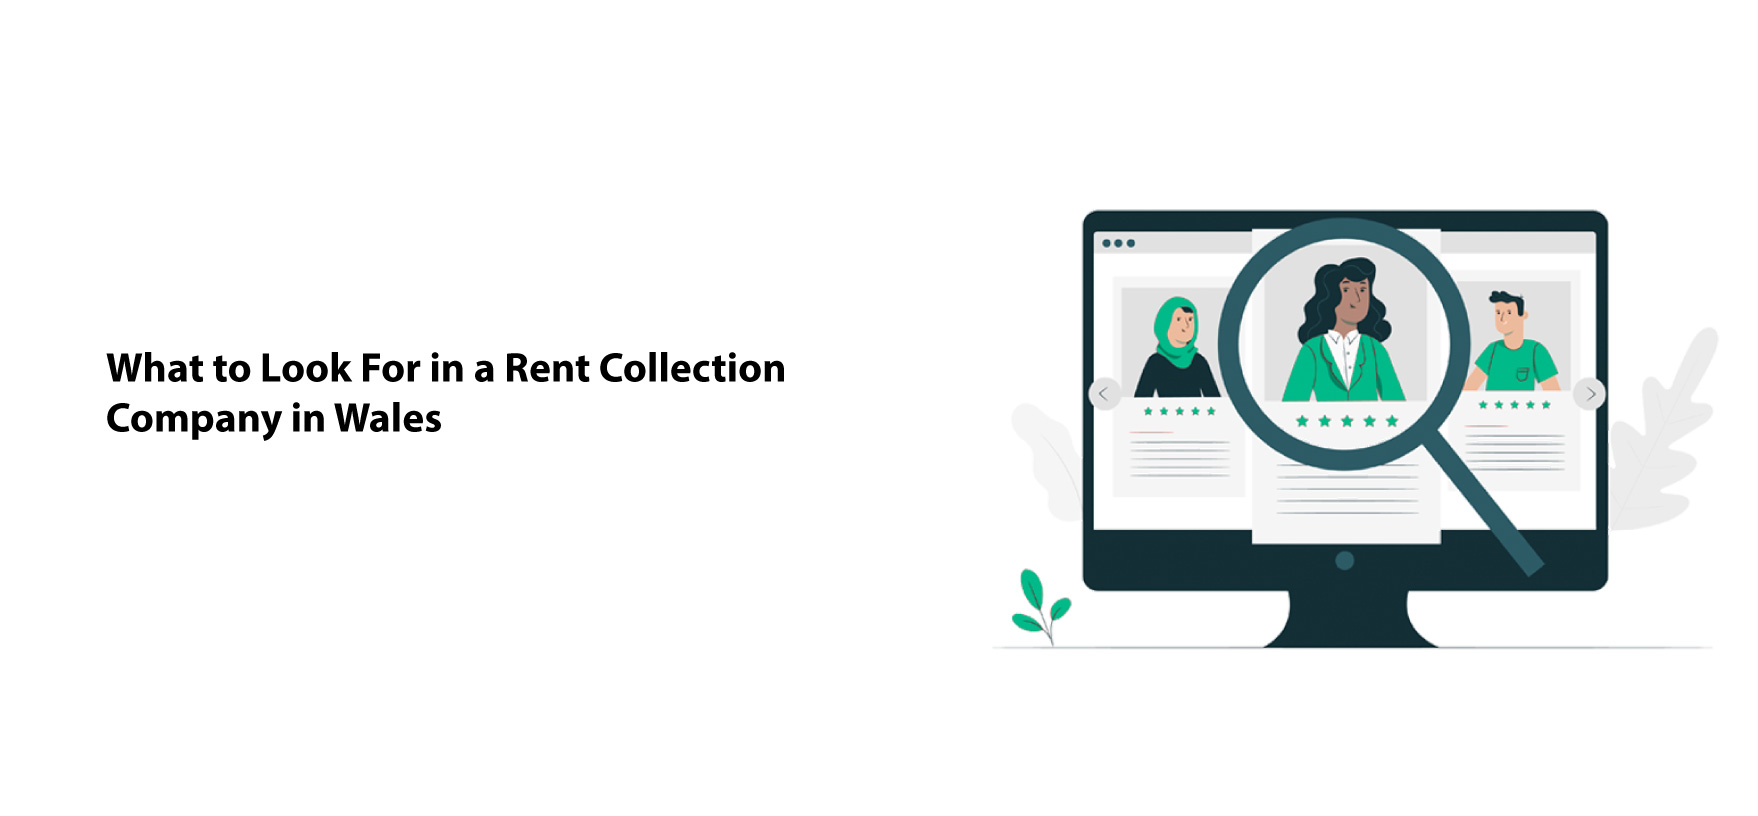 What to Look For in a Rent Collection Company in Wales